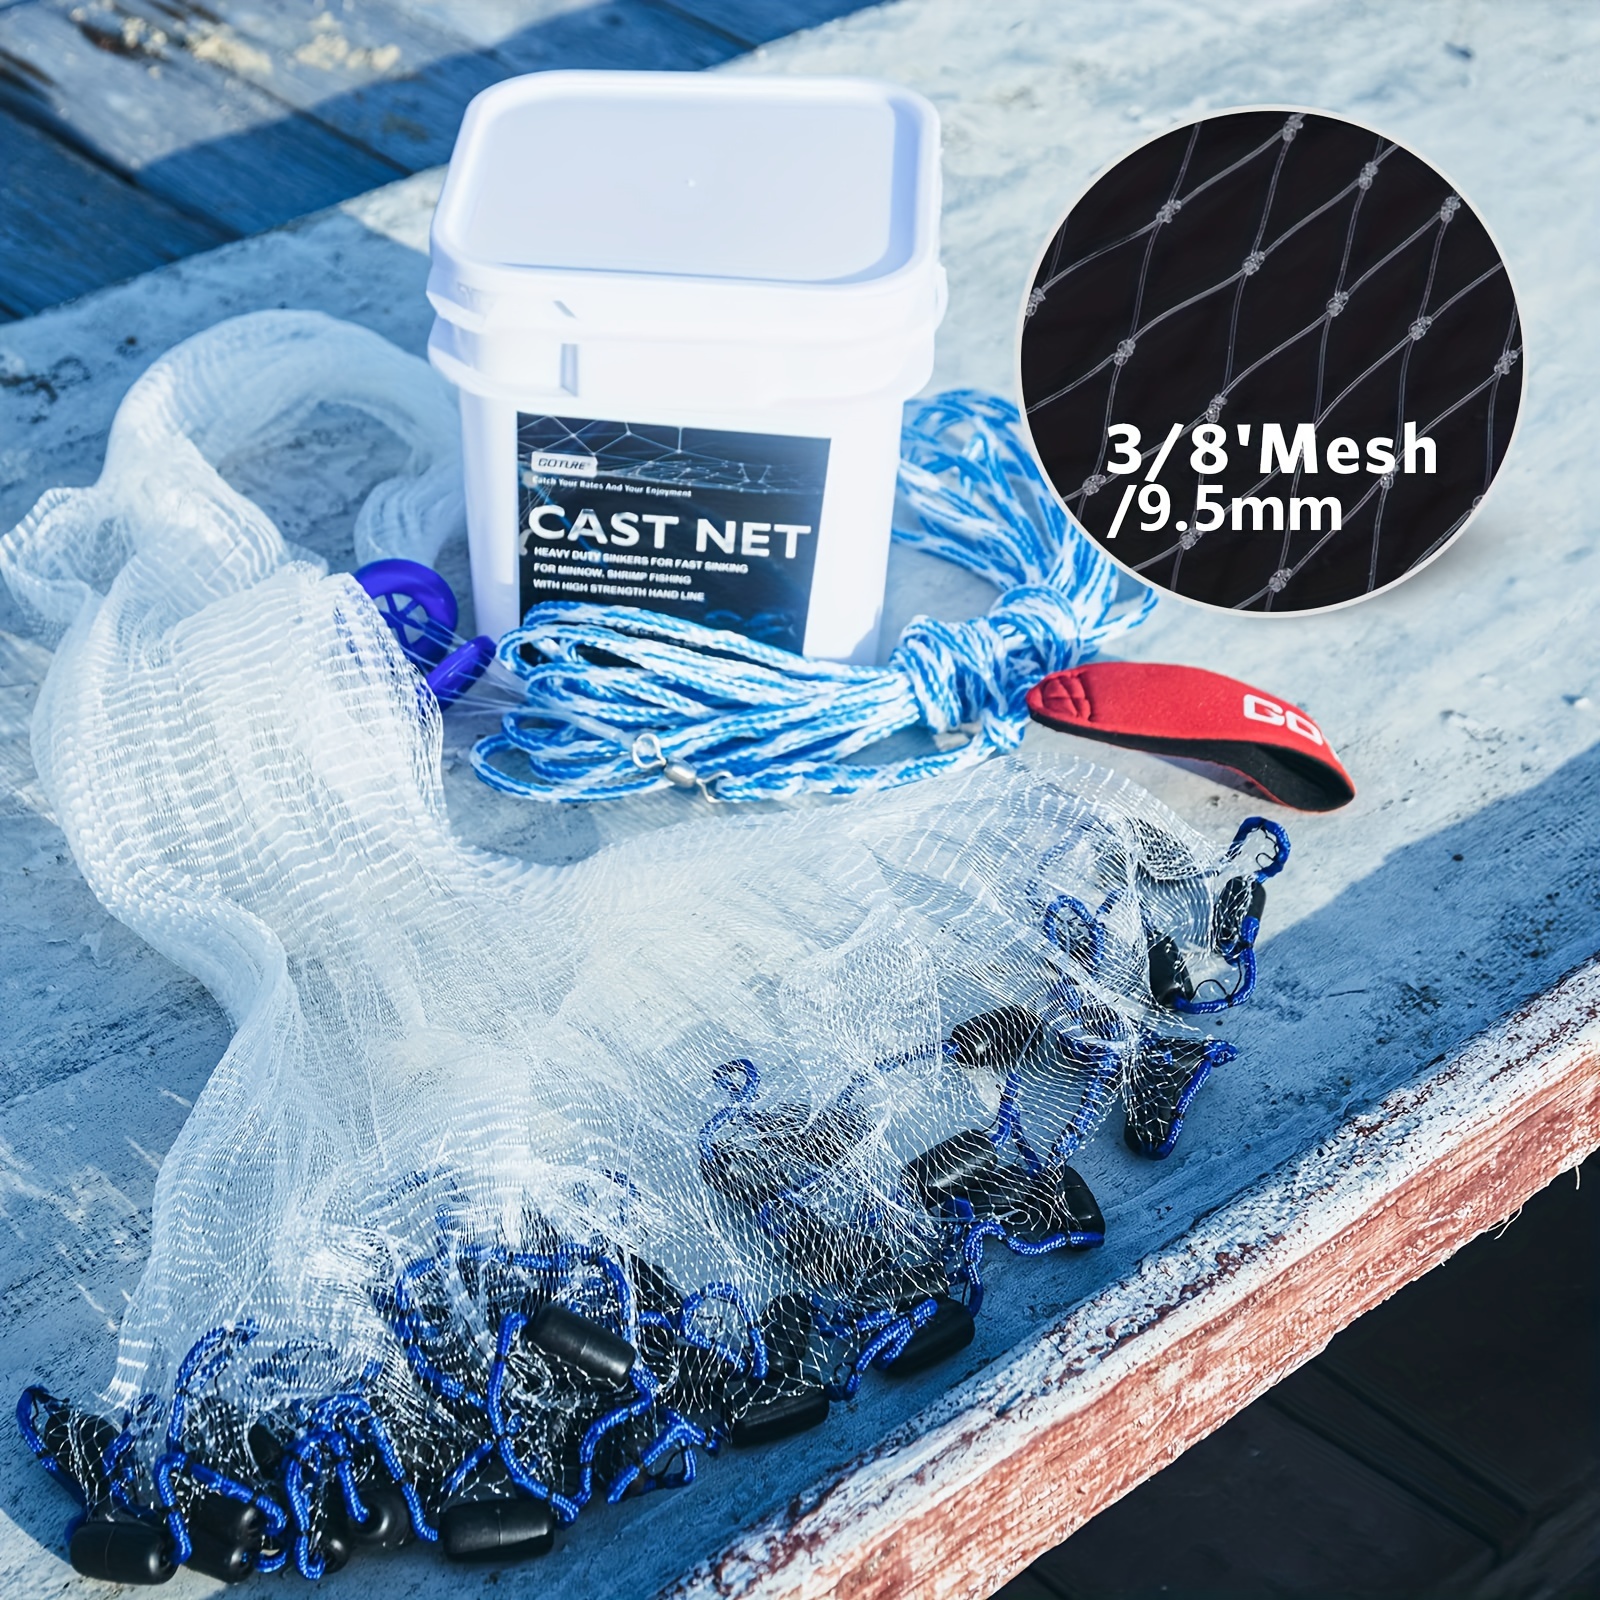 * 1pc Fishing Cast Net For Freshwater Saltwater, Fishing Trap For Bait Fish  Shrimp, 3ft/4ft/6ft/7ft/8ft/10ft/12ft Radius, 3/8inch Mesh Size